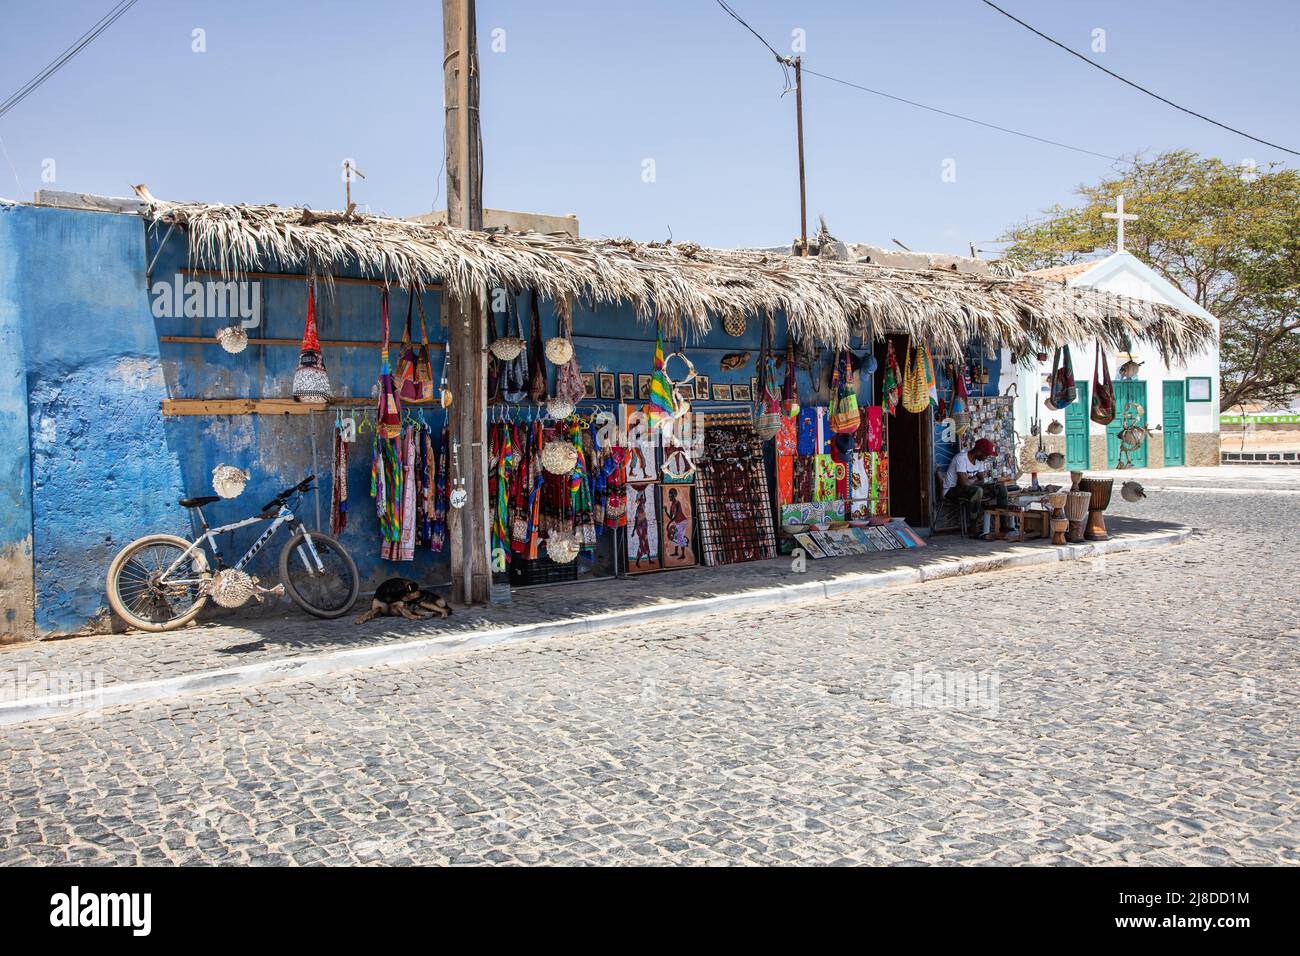 Tradional shop selling souvenirs with Capela de Sao Jose church in the background, Palmeira, Sal, Cape Verde Islands, Africa Stock Photo